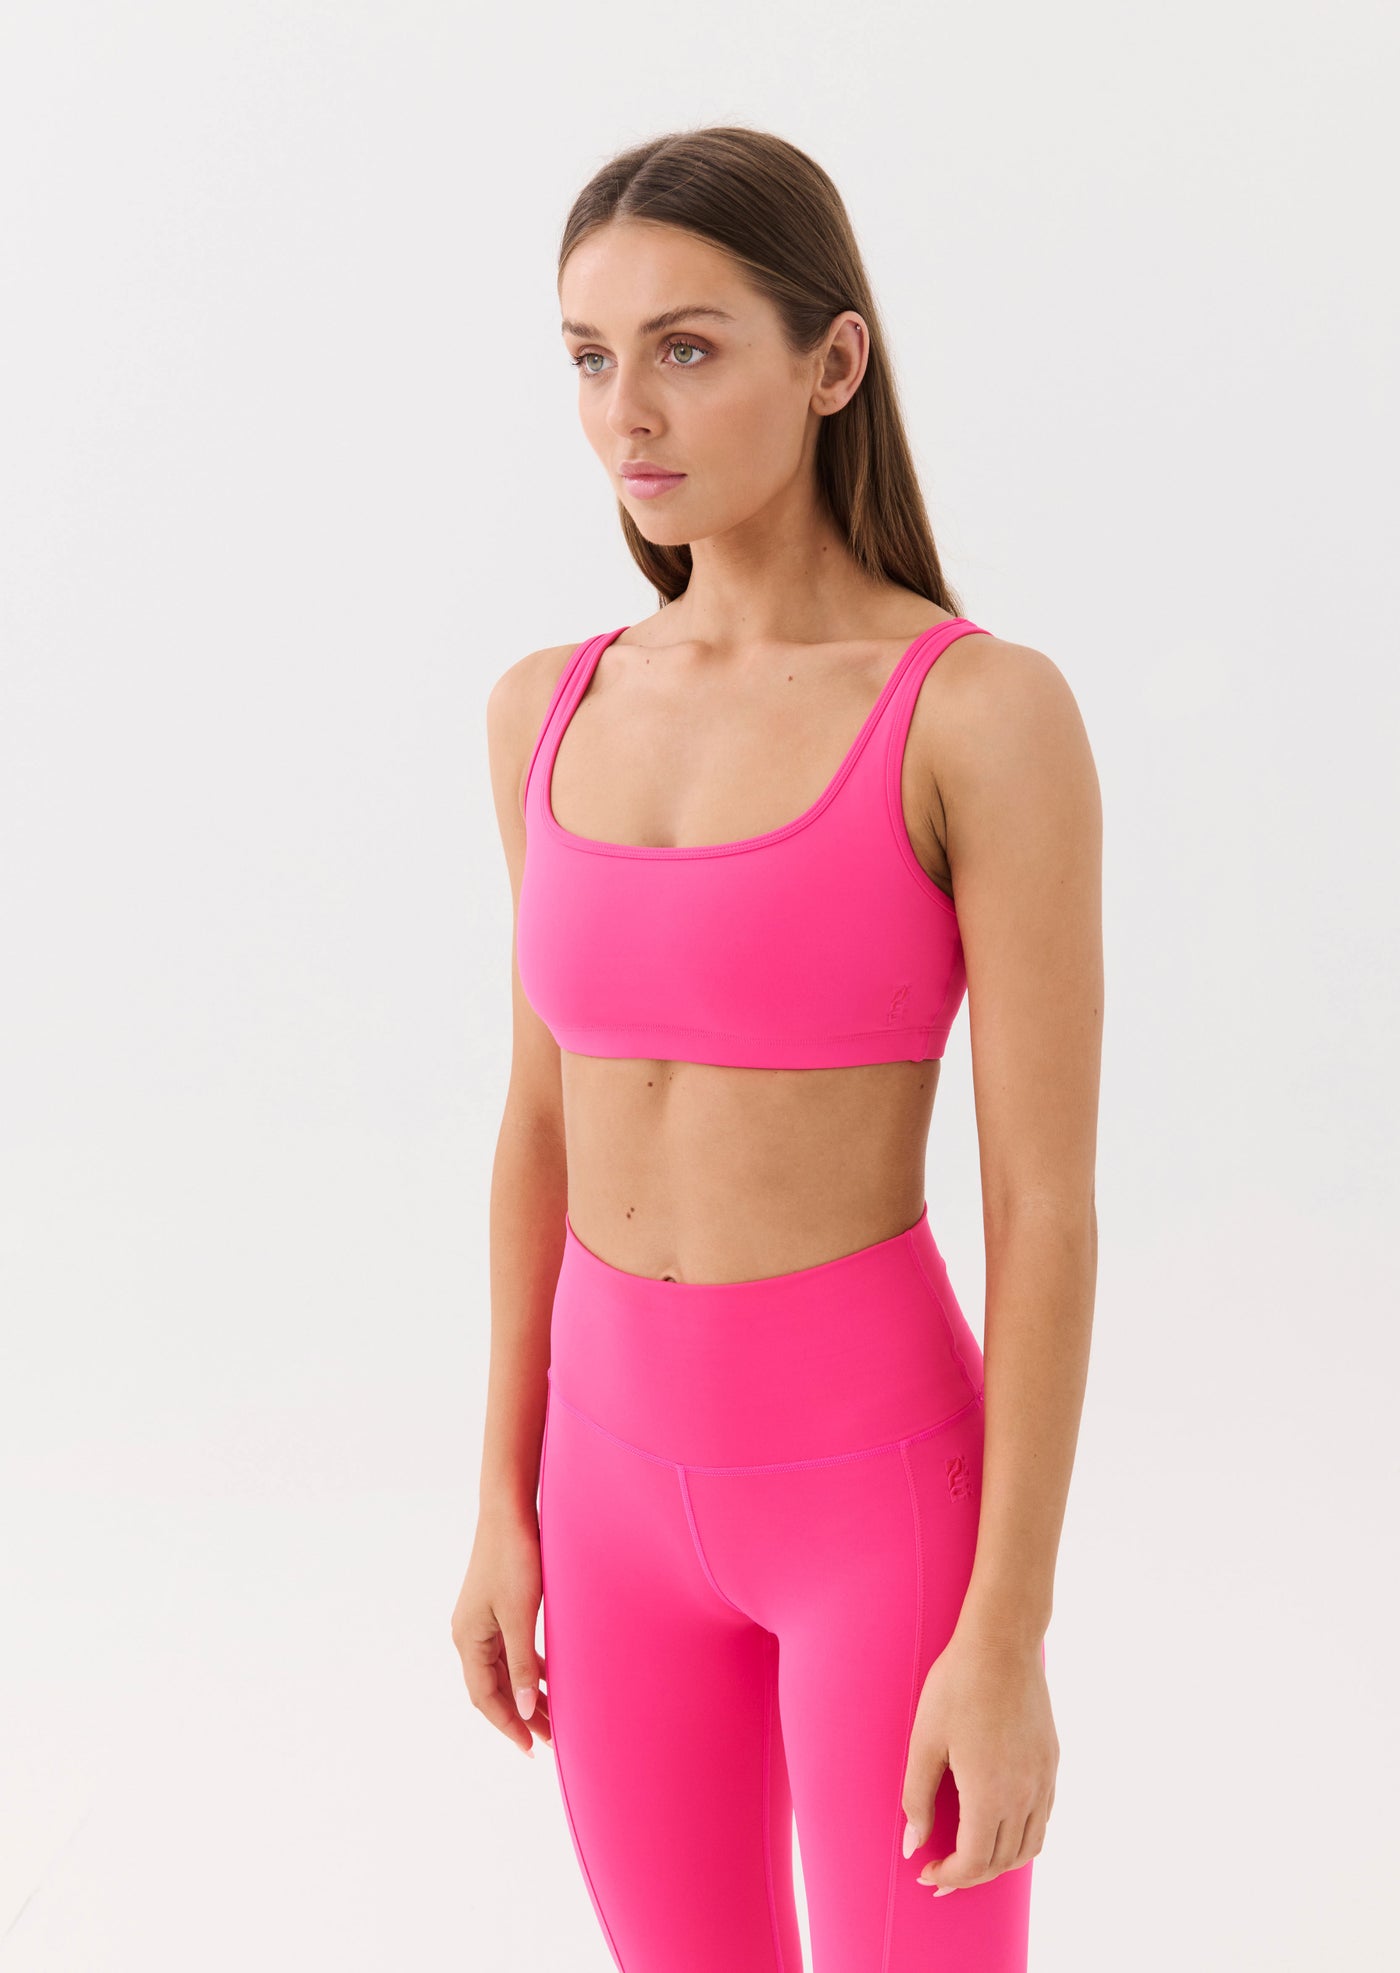 Powersoft NWOT 36 C Go Dry Dusty Rose Sports Bra Wireless Size undefined -  $25 New With Tags - From M